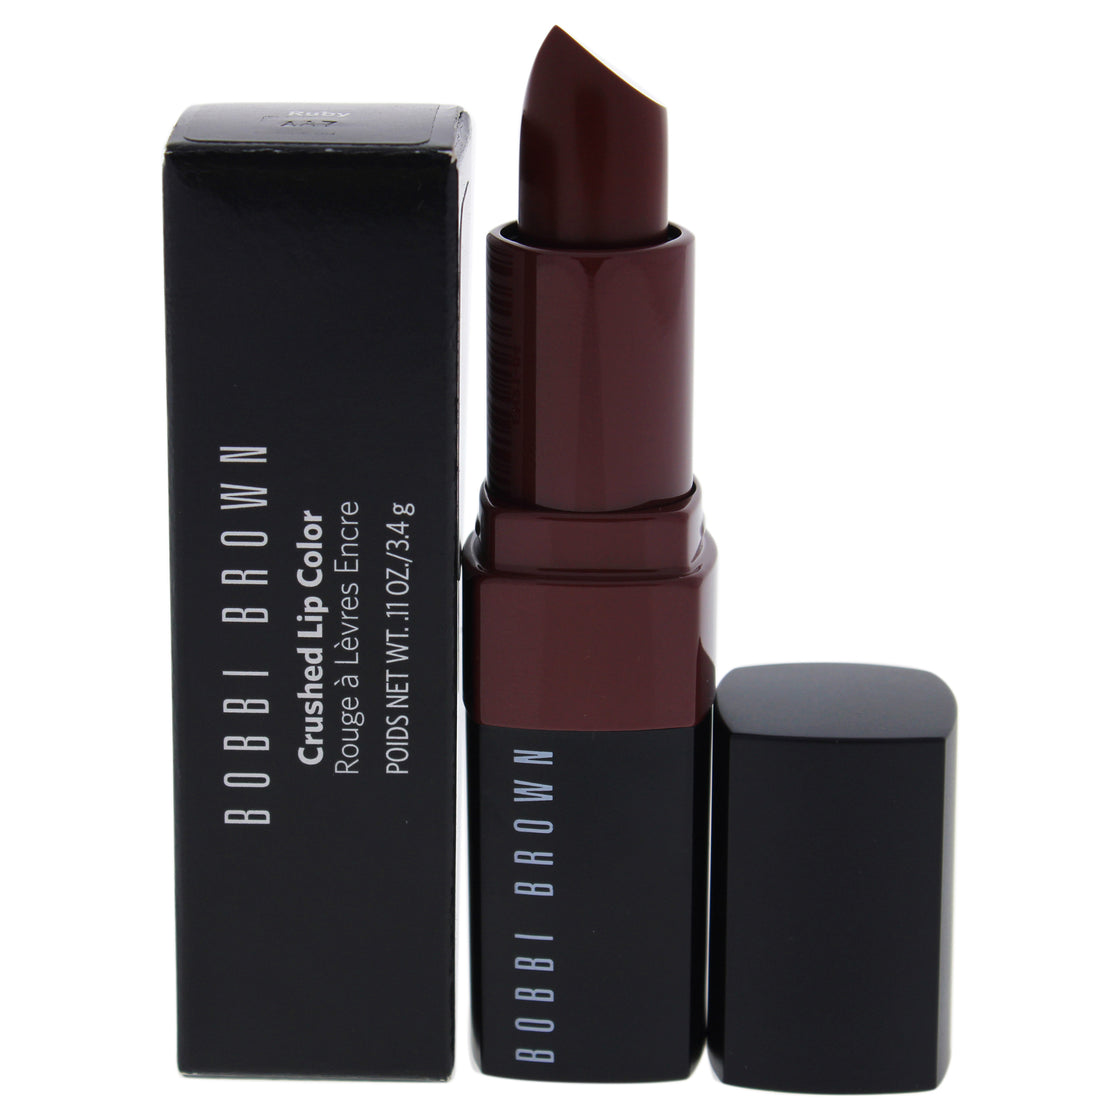 Crushed Lip Color - Ruby by Bobbi Brown for Women - 0.11 oz Lipstick